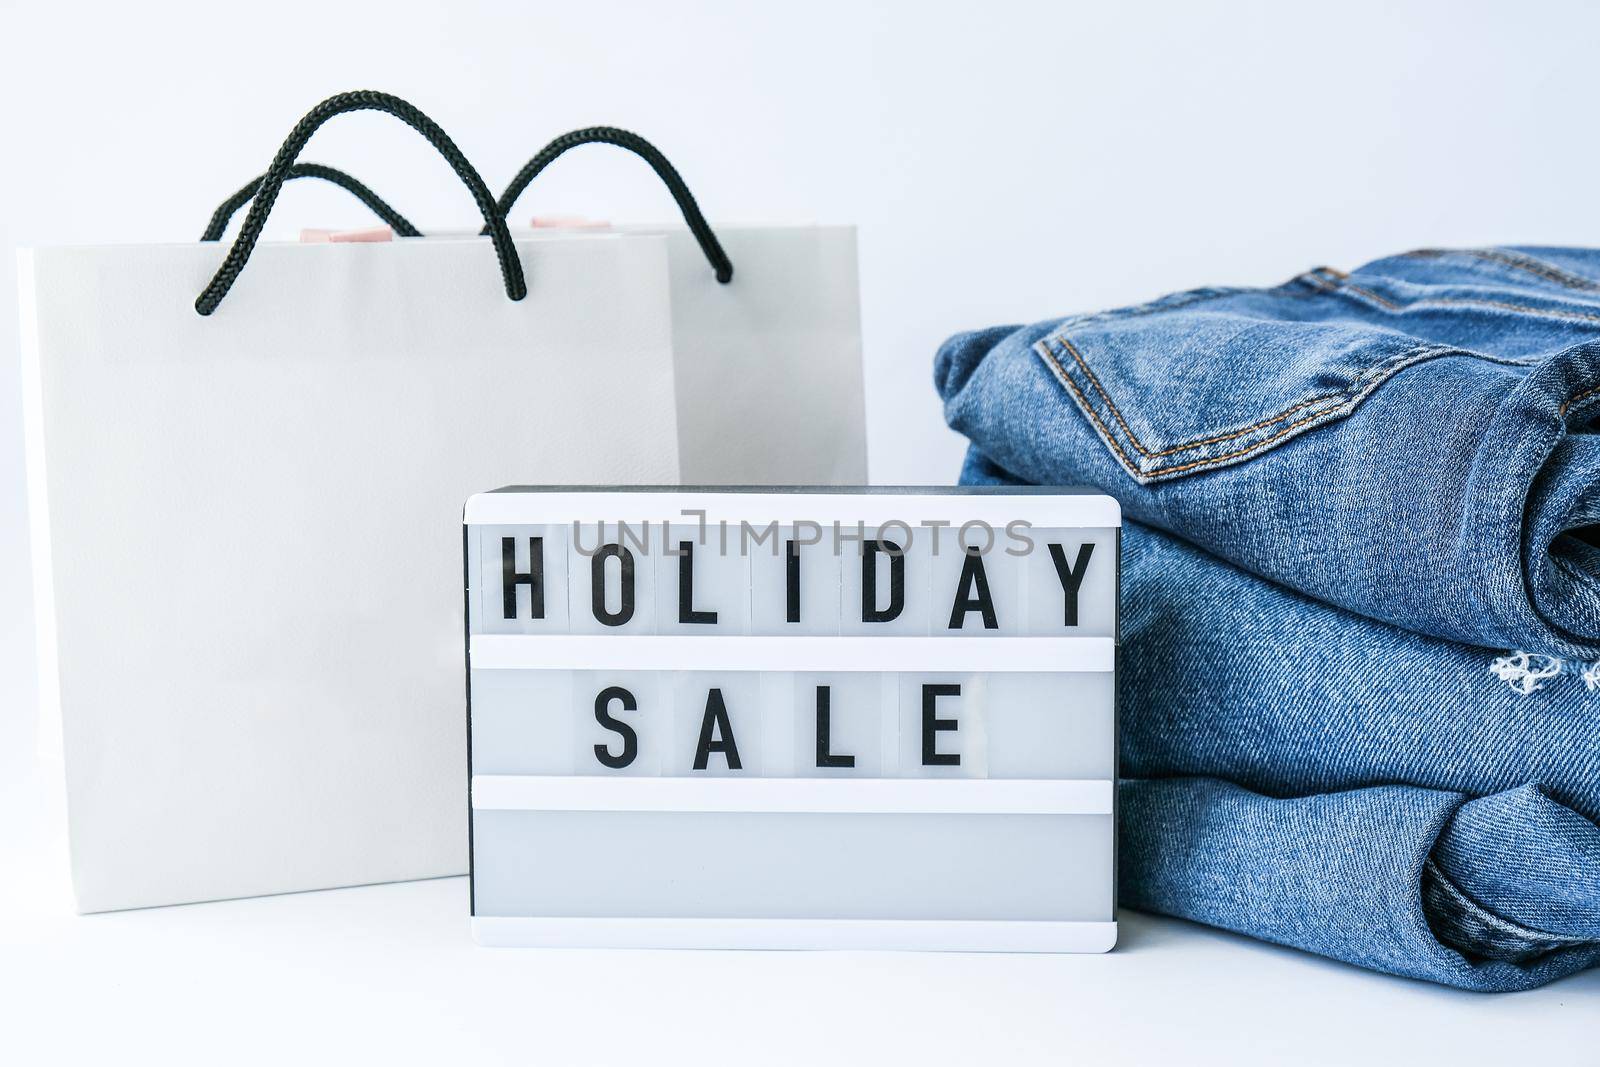 Light board with text HOLIDAY SALE with paper shopping bags, jeans clothes. Big Sale online shopping concept. Promotion advertising. Holiday Cyber monday.